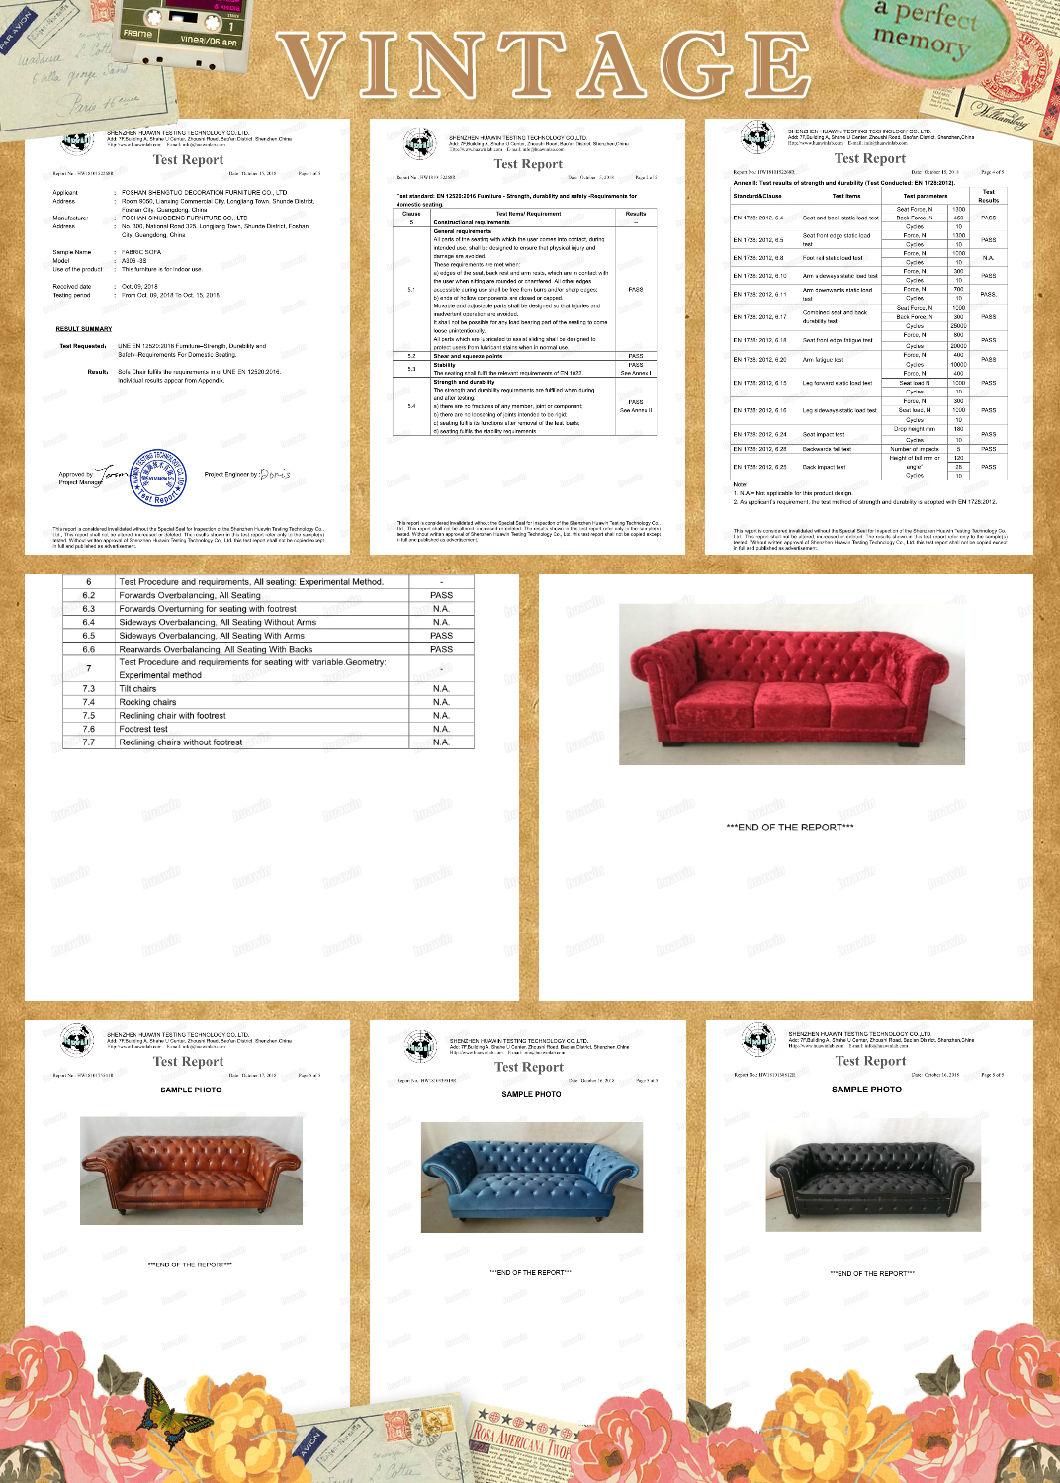 Full Chinese Top Grain Leather Italy Top Grain Leather Fabric PU PVC Flannelette Hotel Lobby Reception Sectional Corner Sofa Furniture Project Sofa Furniture